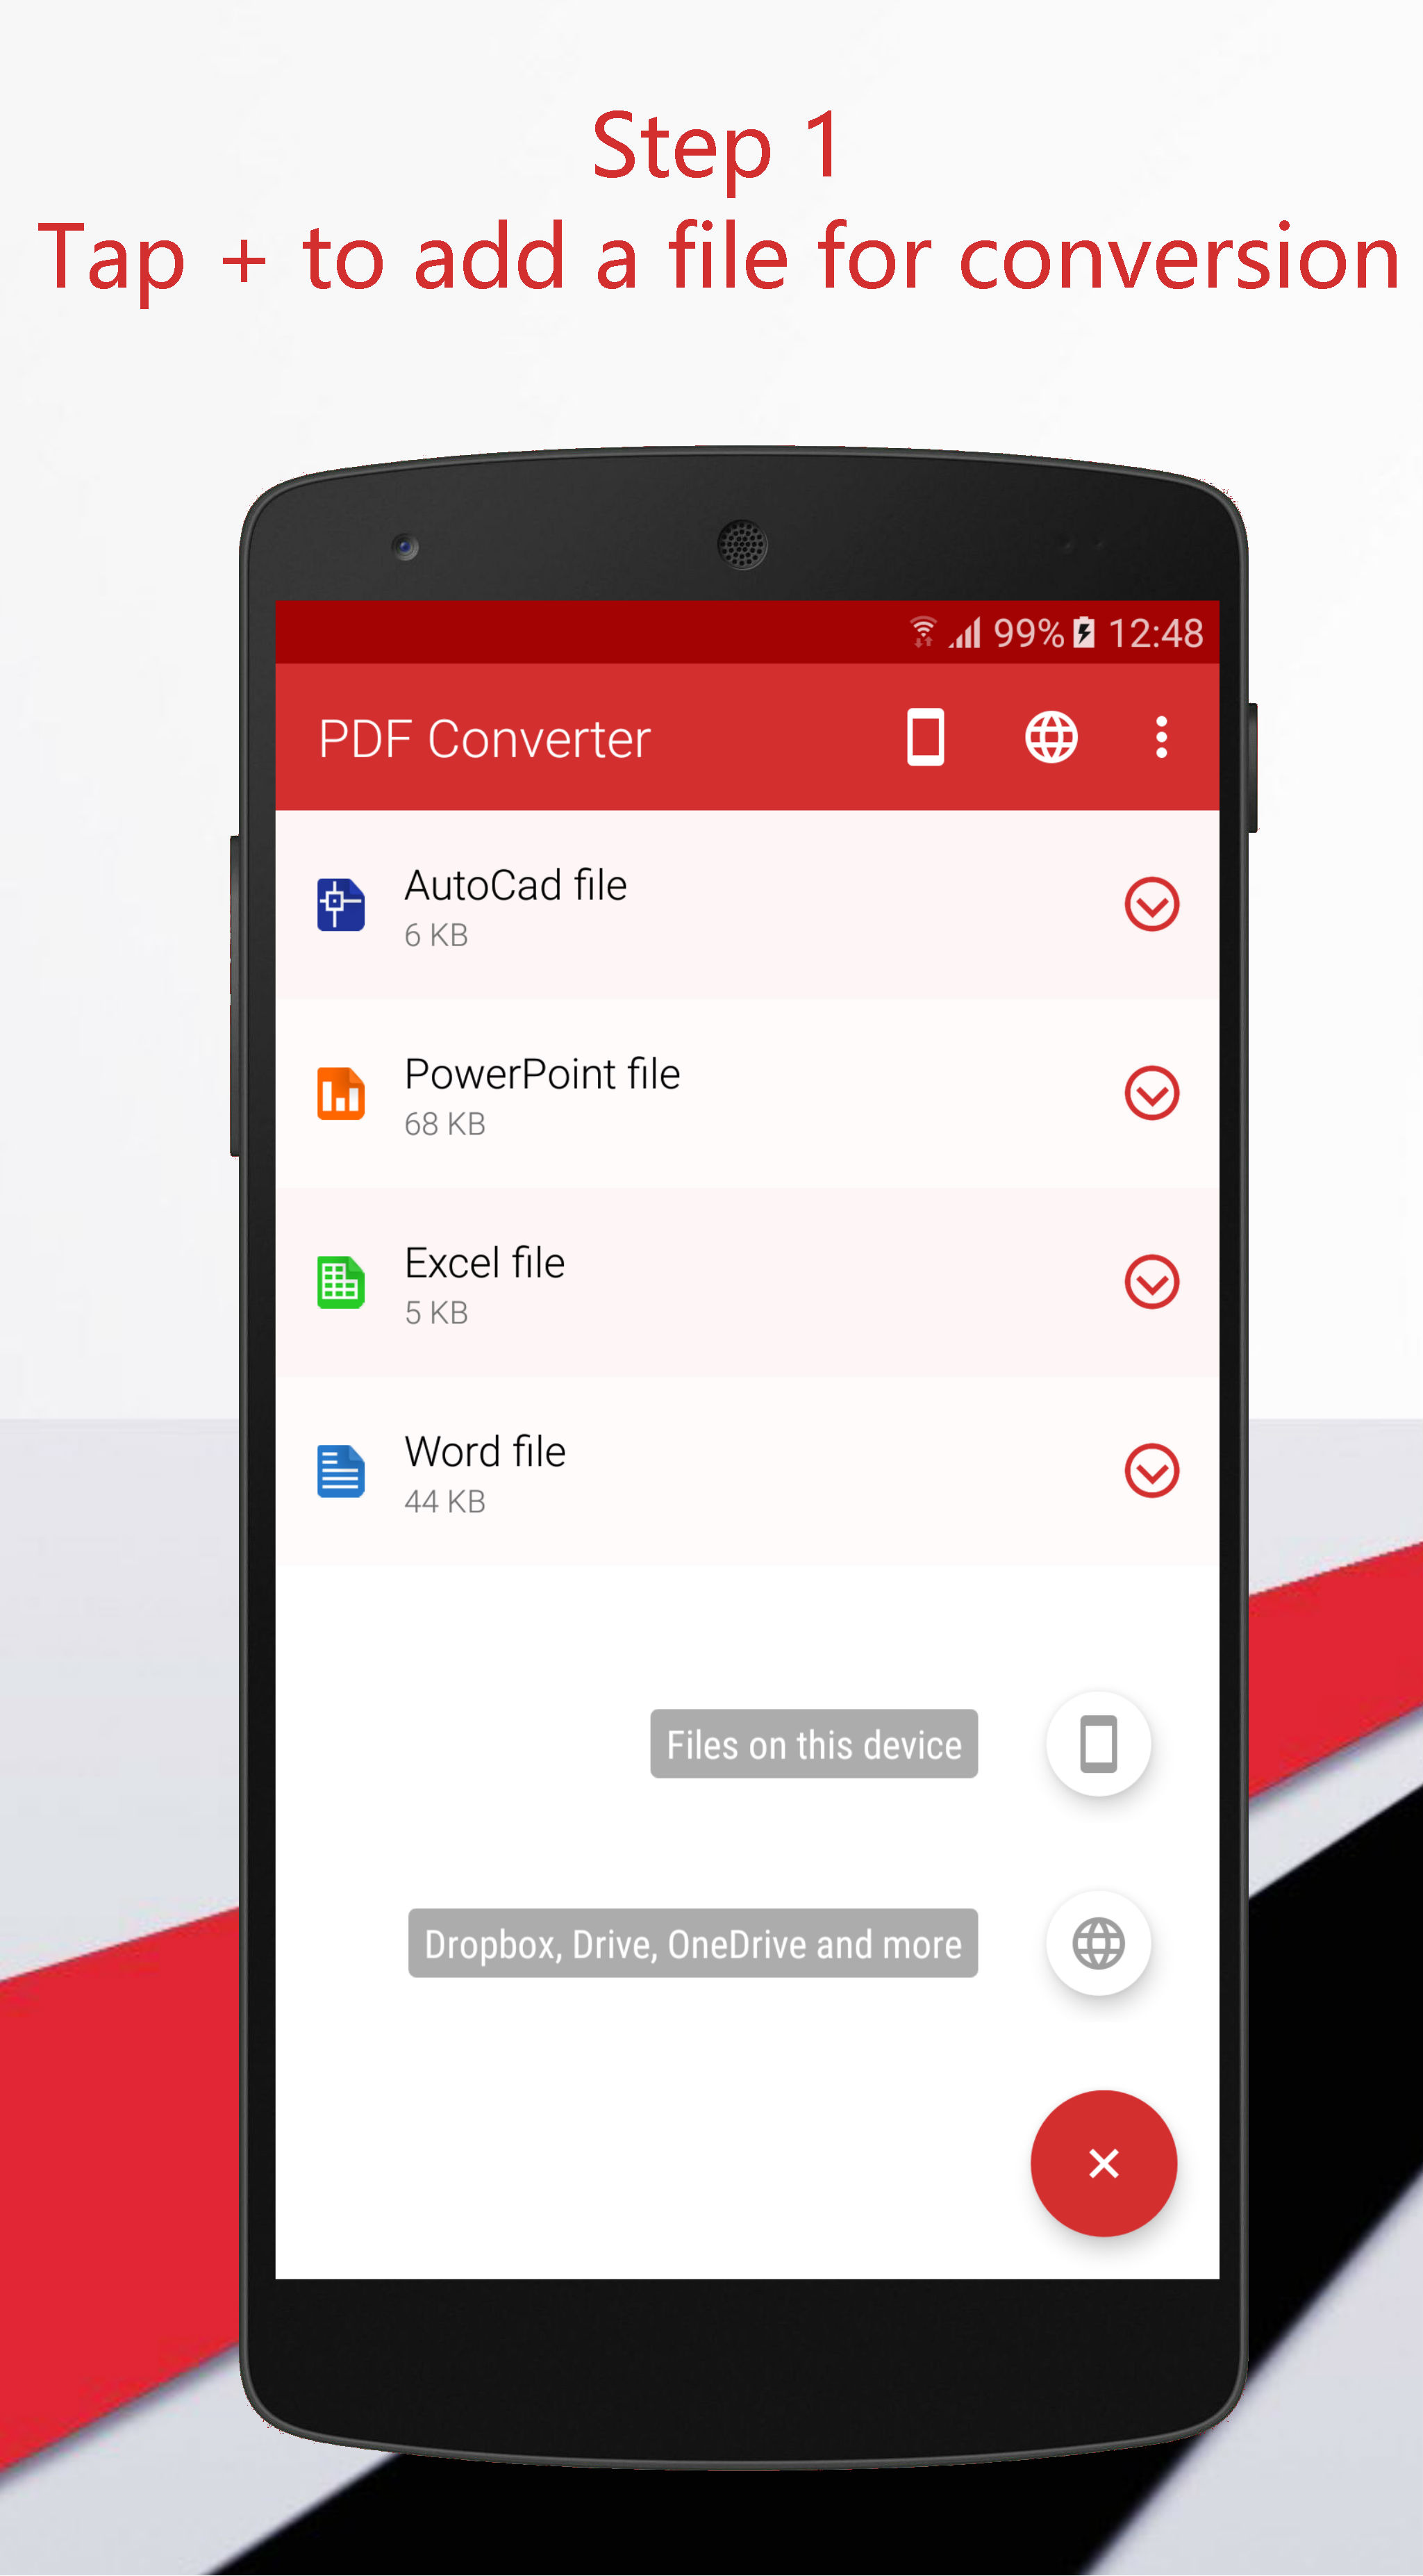 PDF Converter Ultimate - All In One Converter